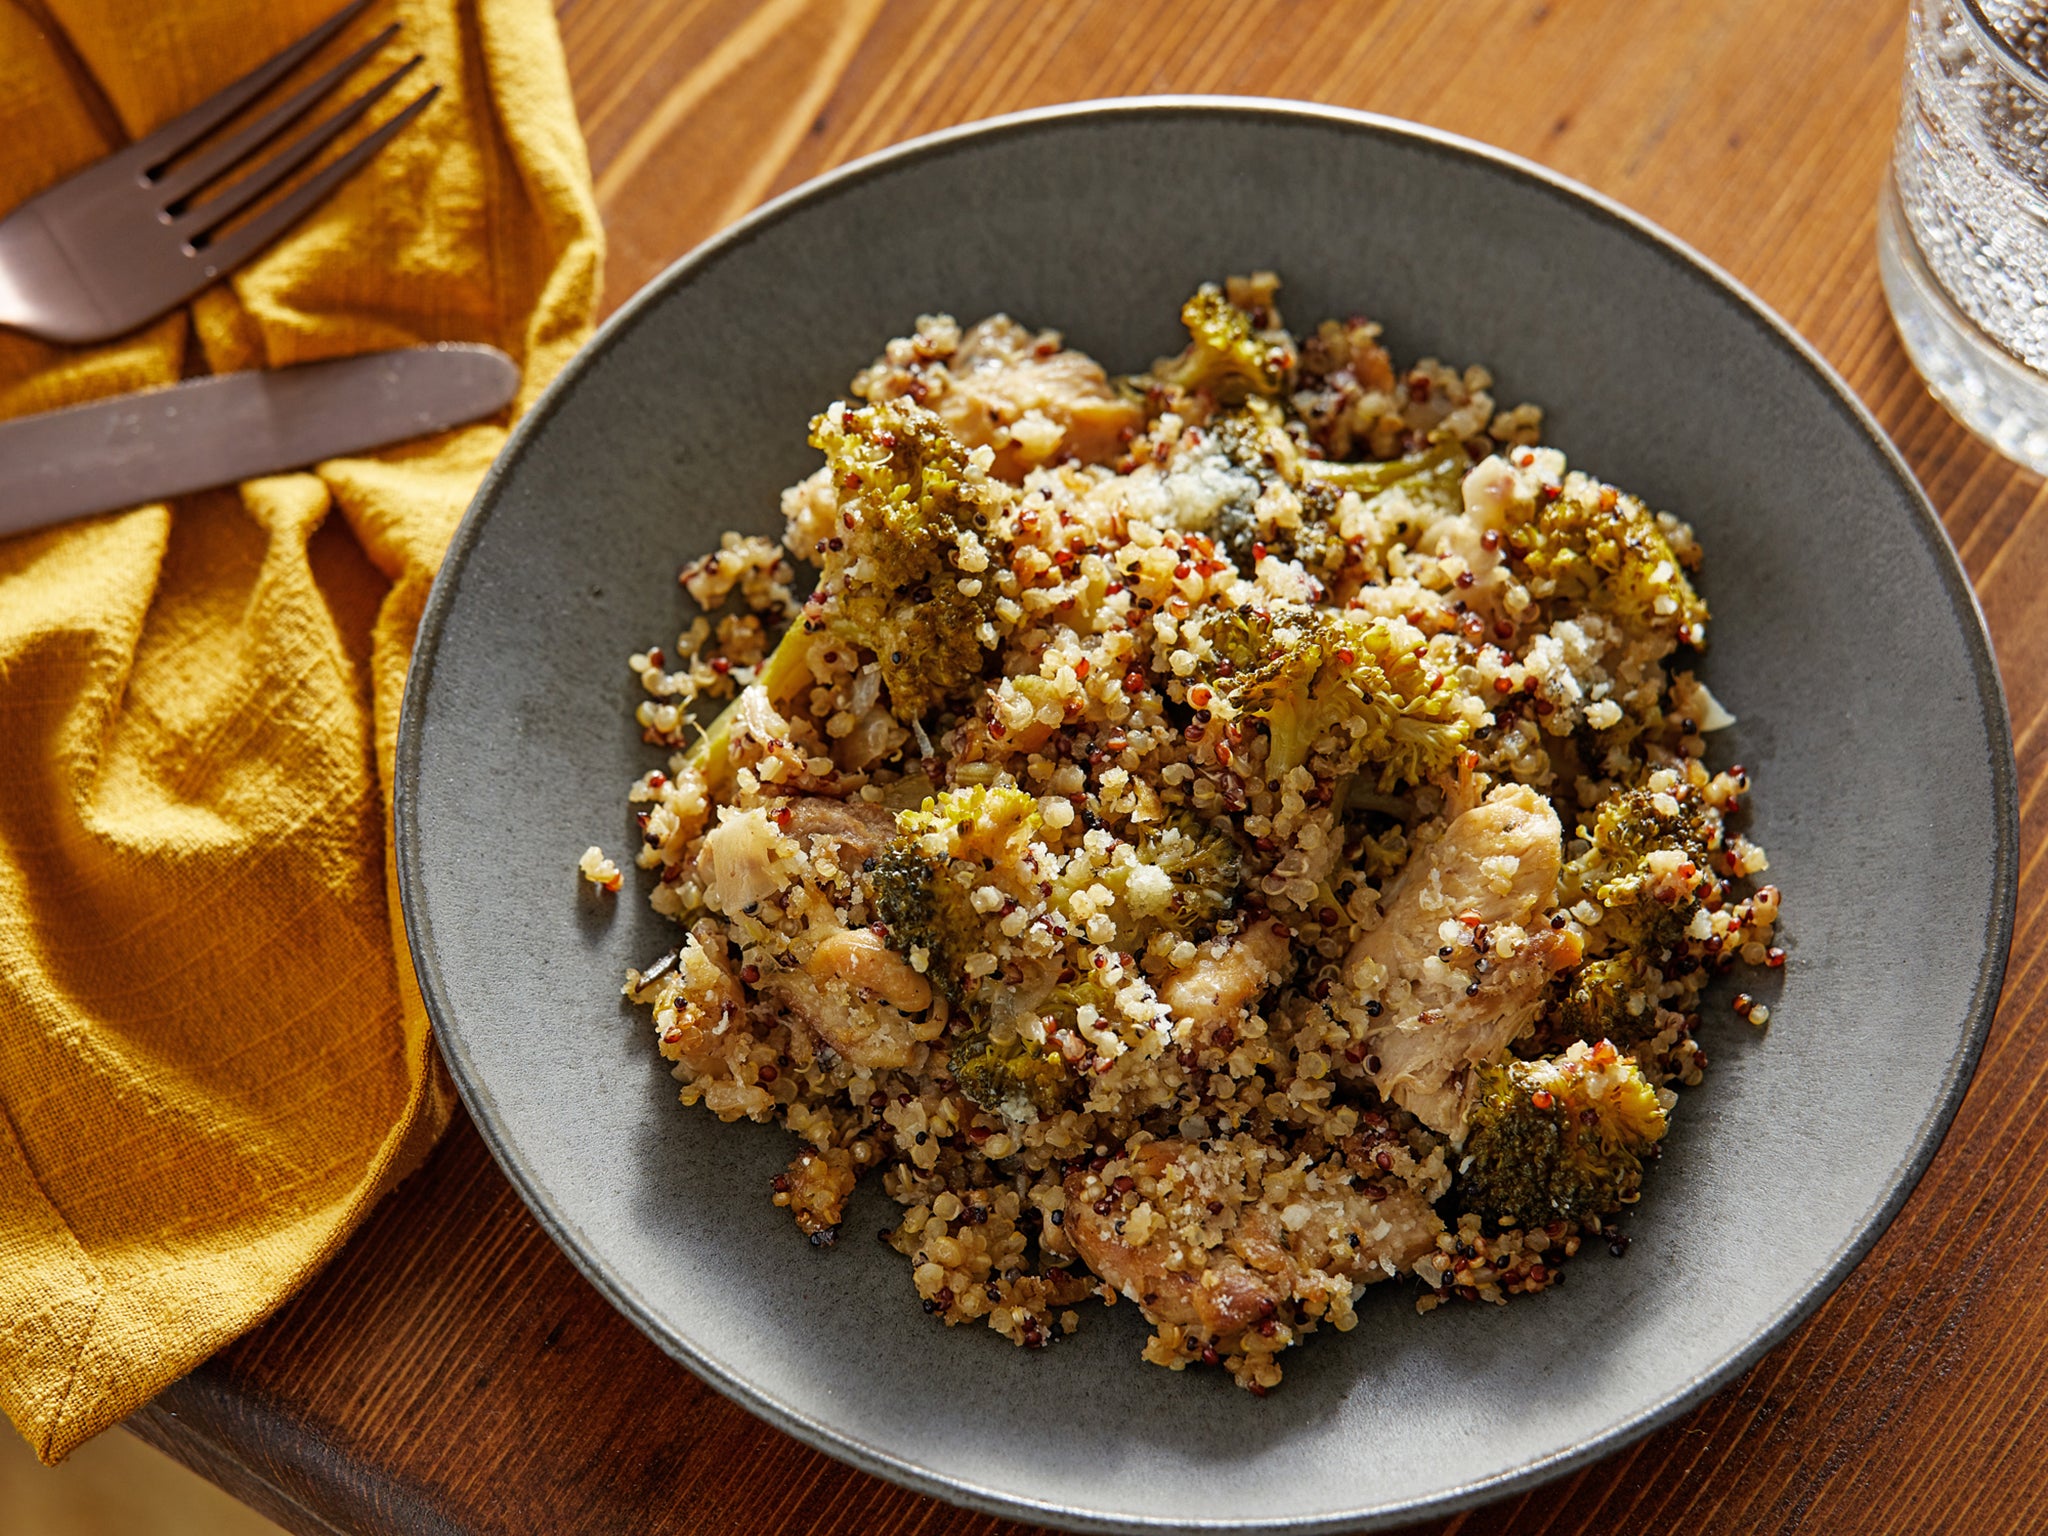 Take chicken, quinoa and broccoli and marry them in a creamy, rosemary-infused parmesan sauce